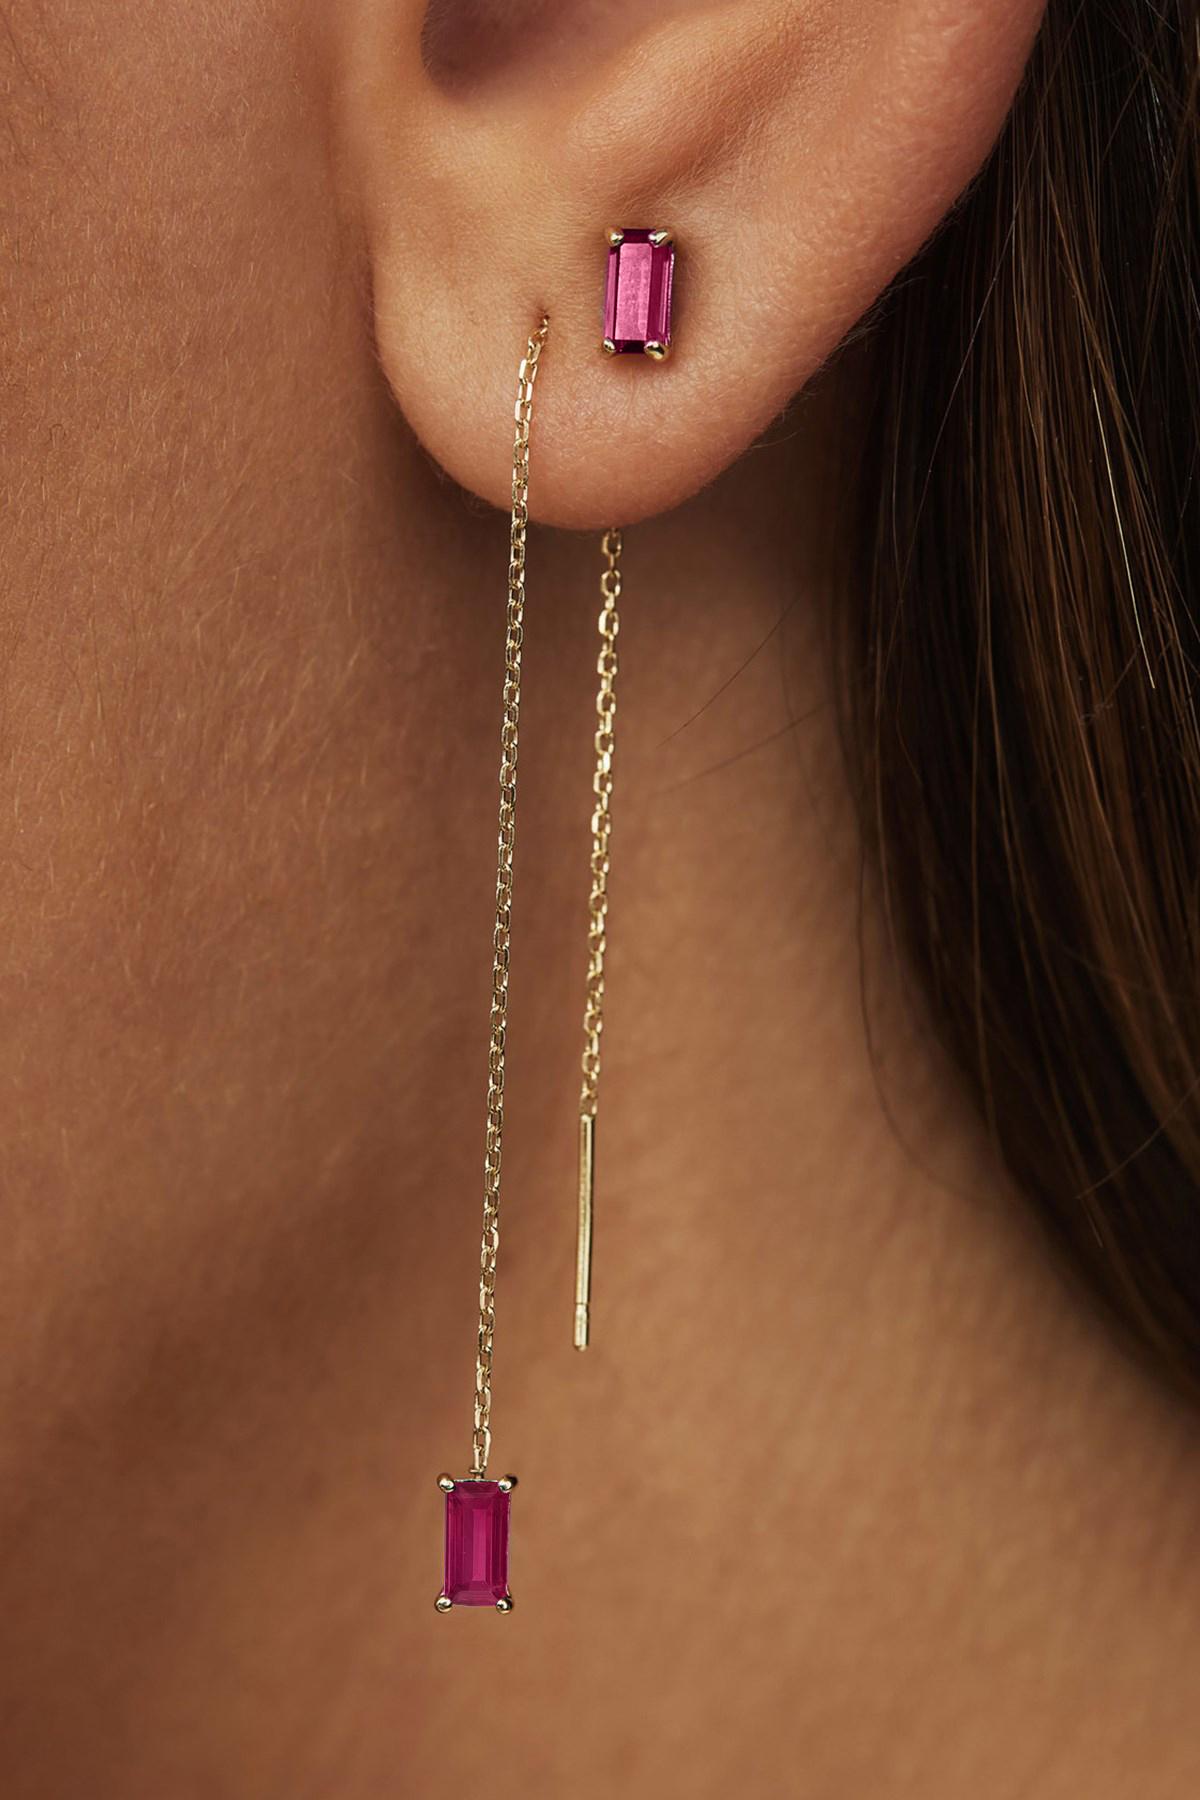 Women's 14k Solid Gold Drop Earrings with rubies.  For Sale